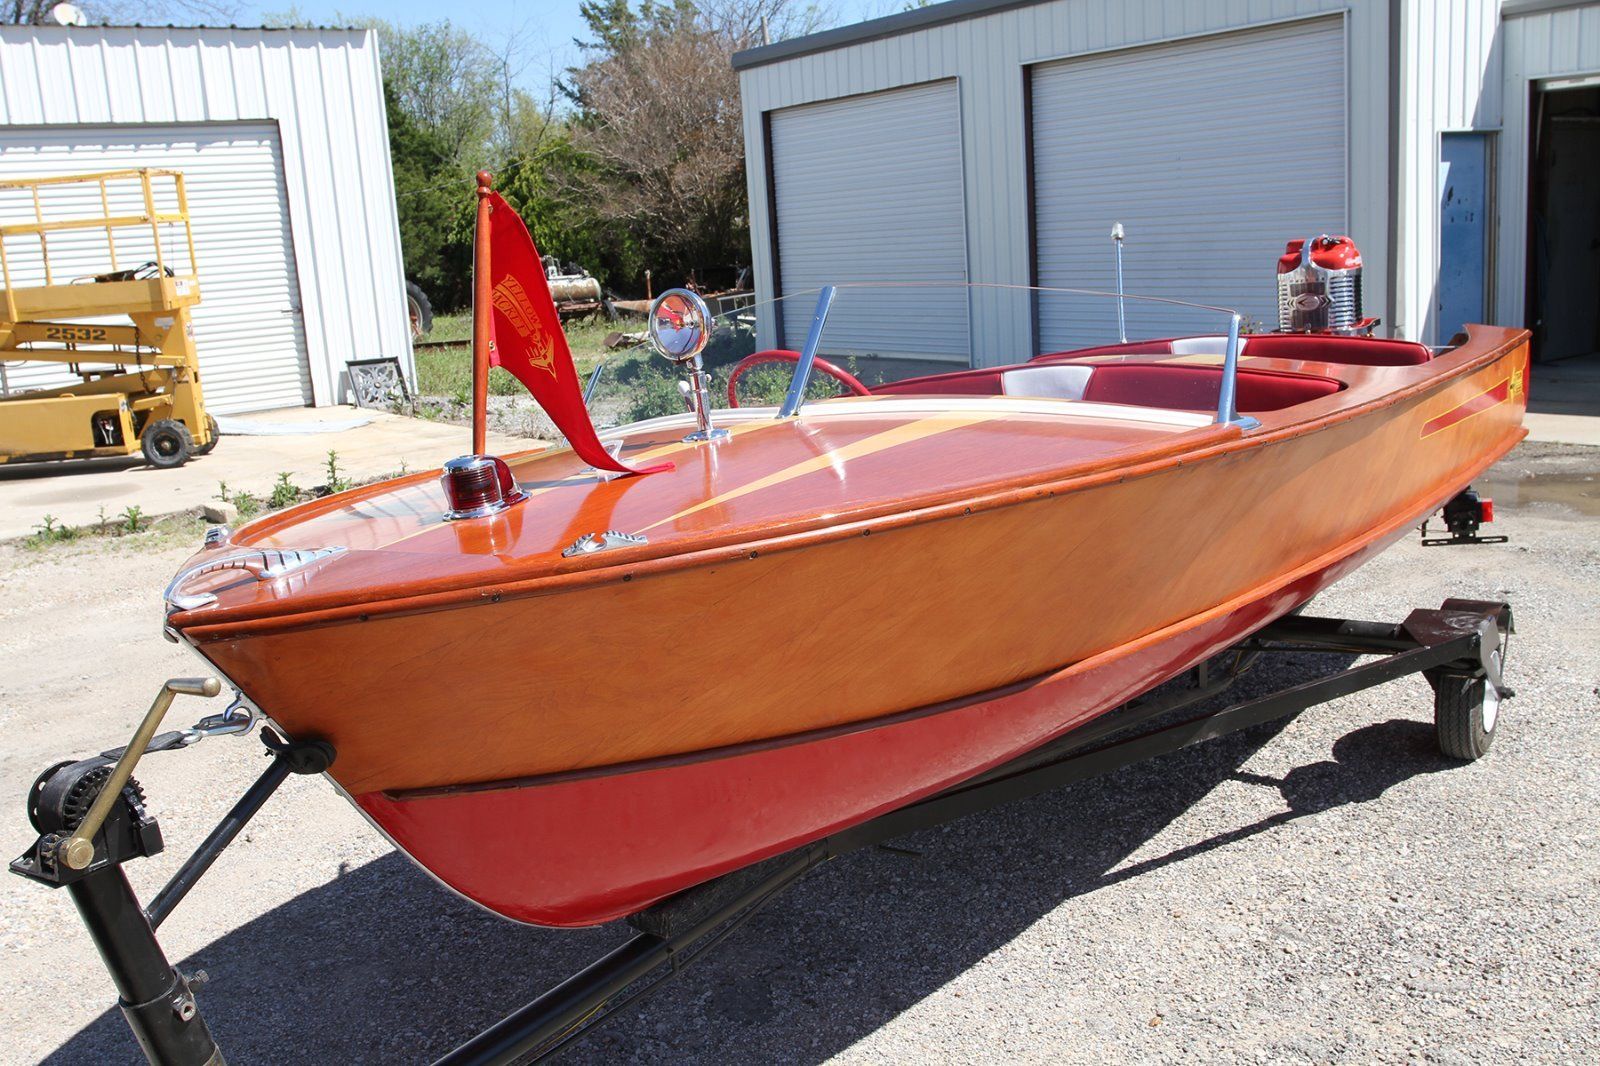 yellow jacket catalina 1956 for sale for $14,000 - boats